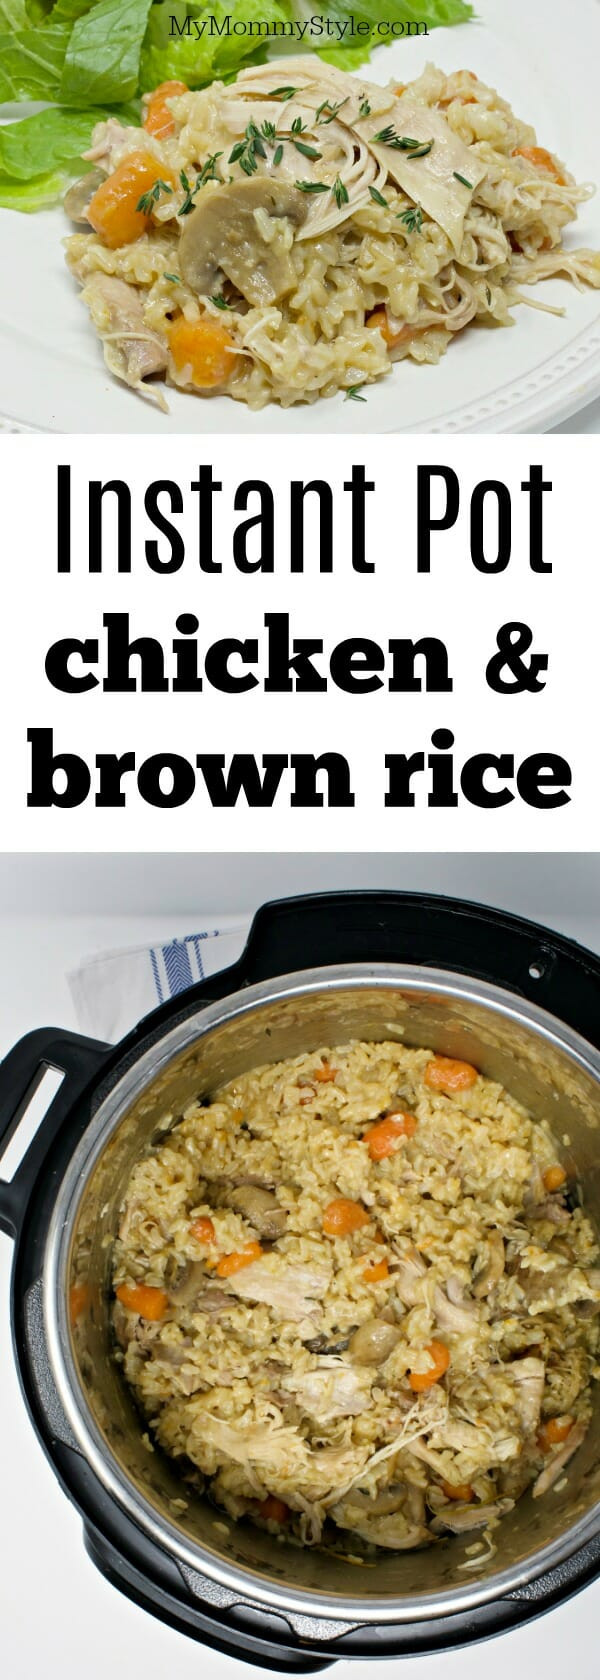 Chicken And Brown Rice Instant Pot
 Instant pot chicken and rice My Mommy Style